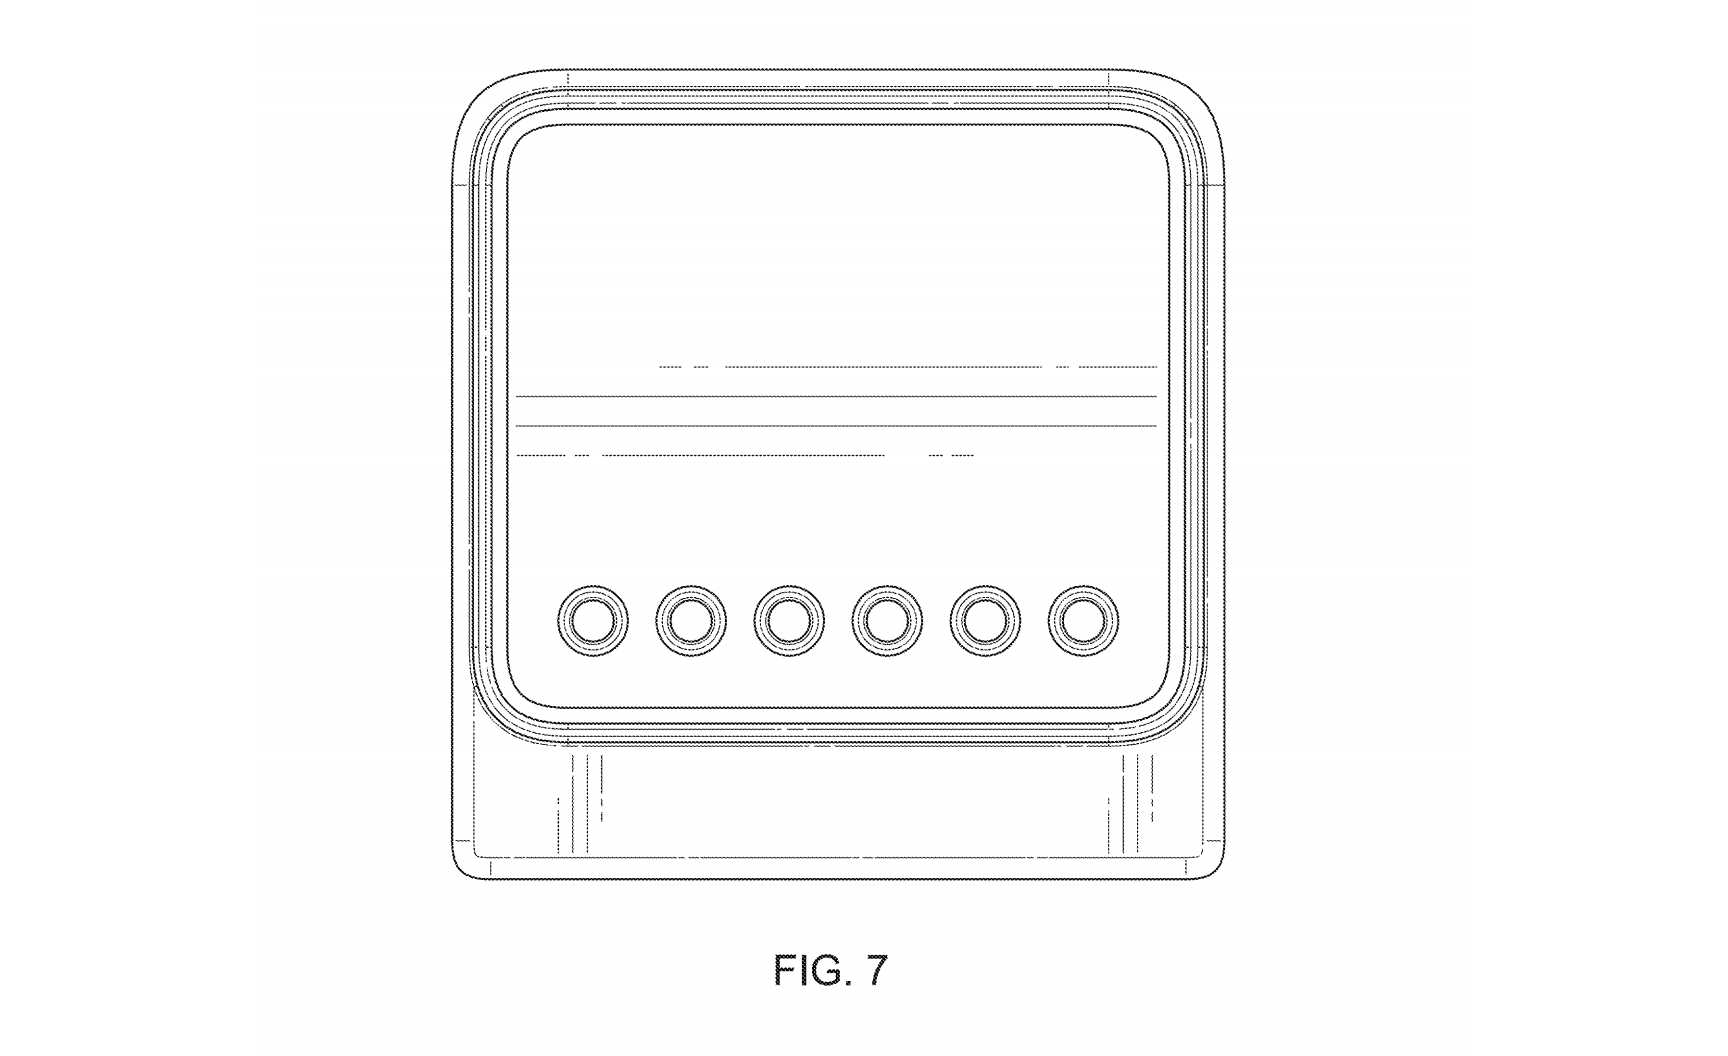 This May Be What Facebook’s Delayed Smart Speaker Could Look Like